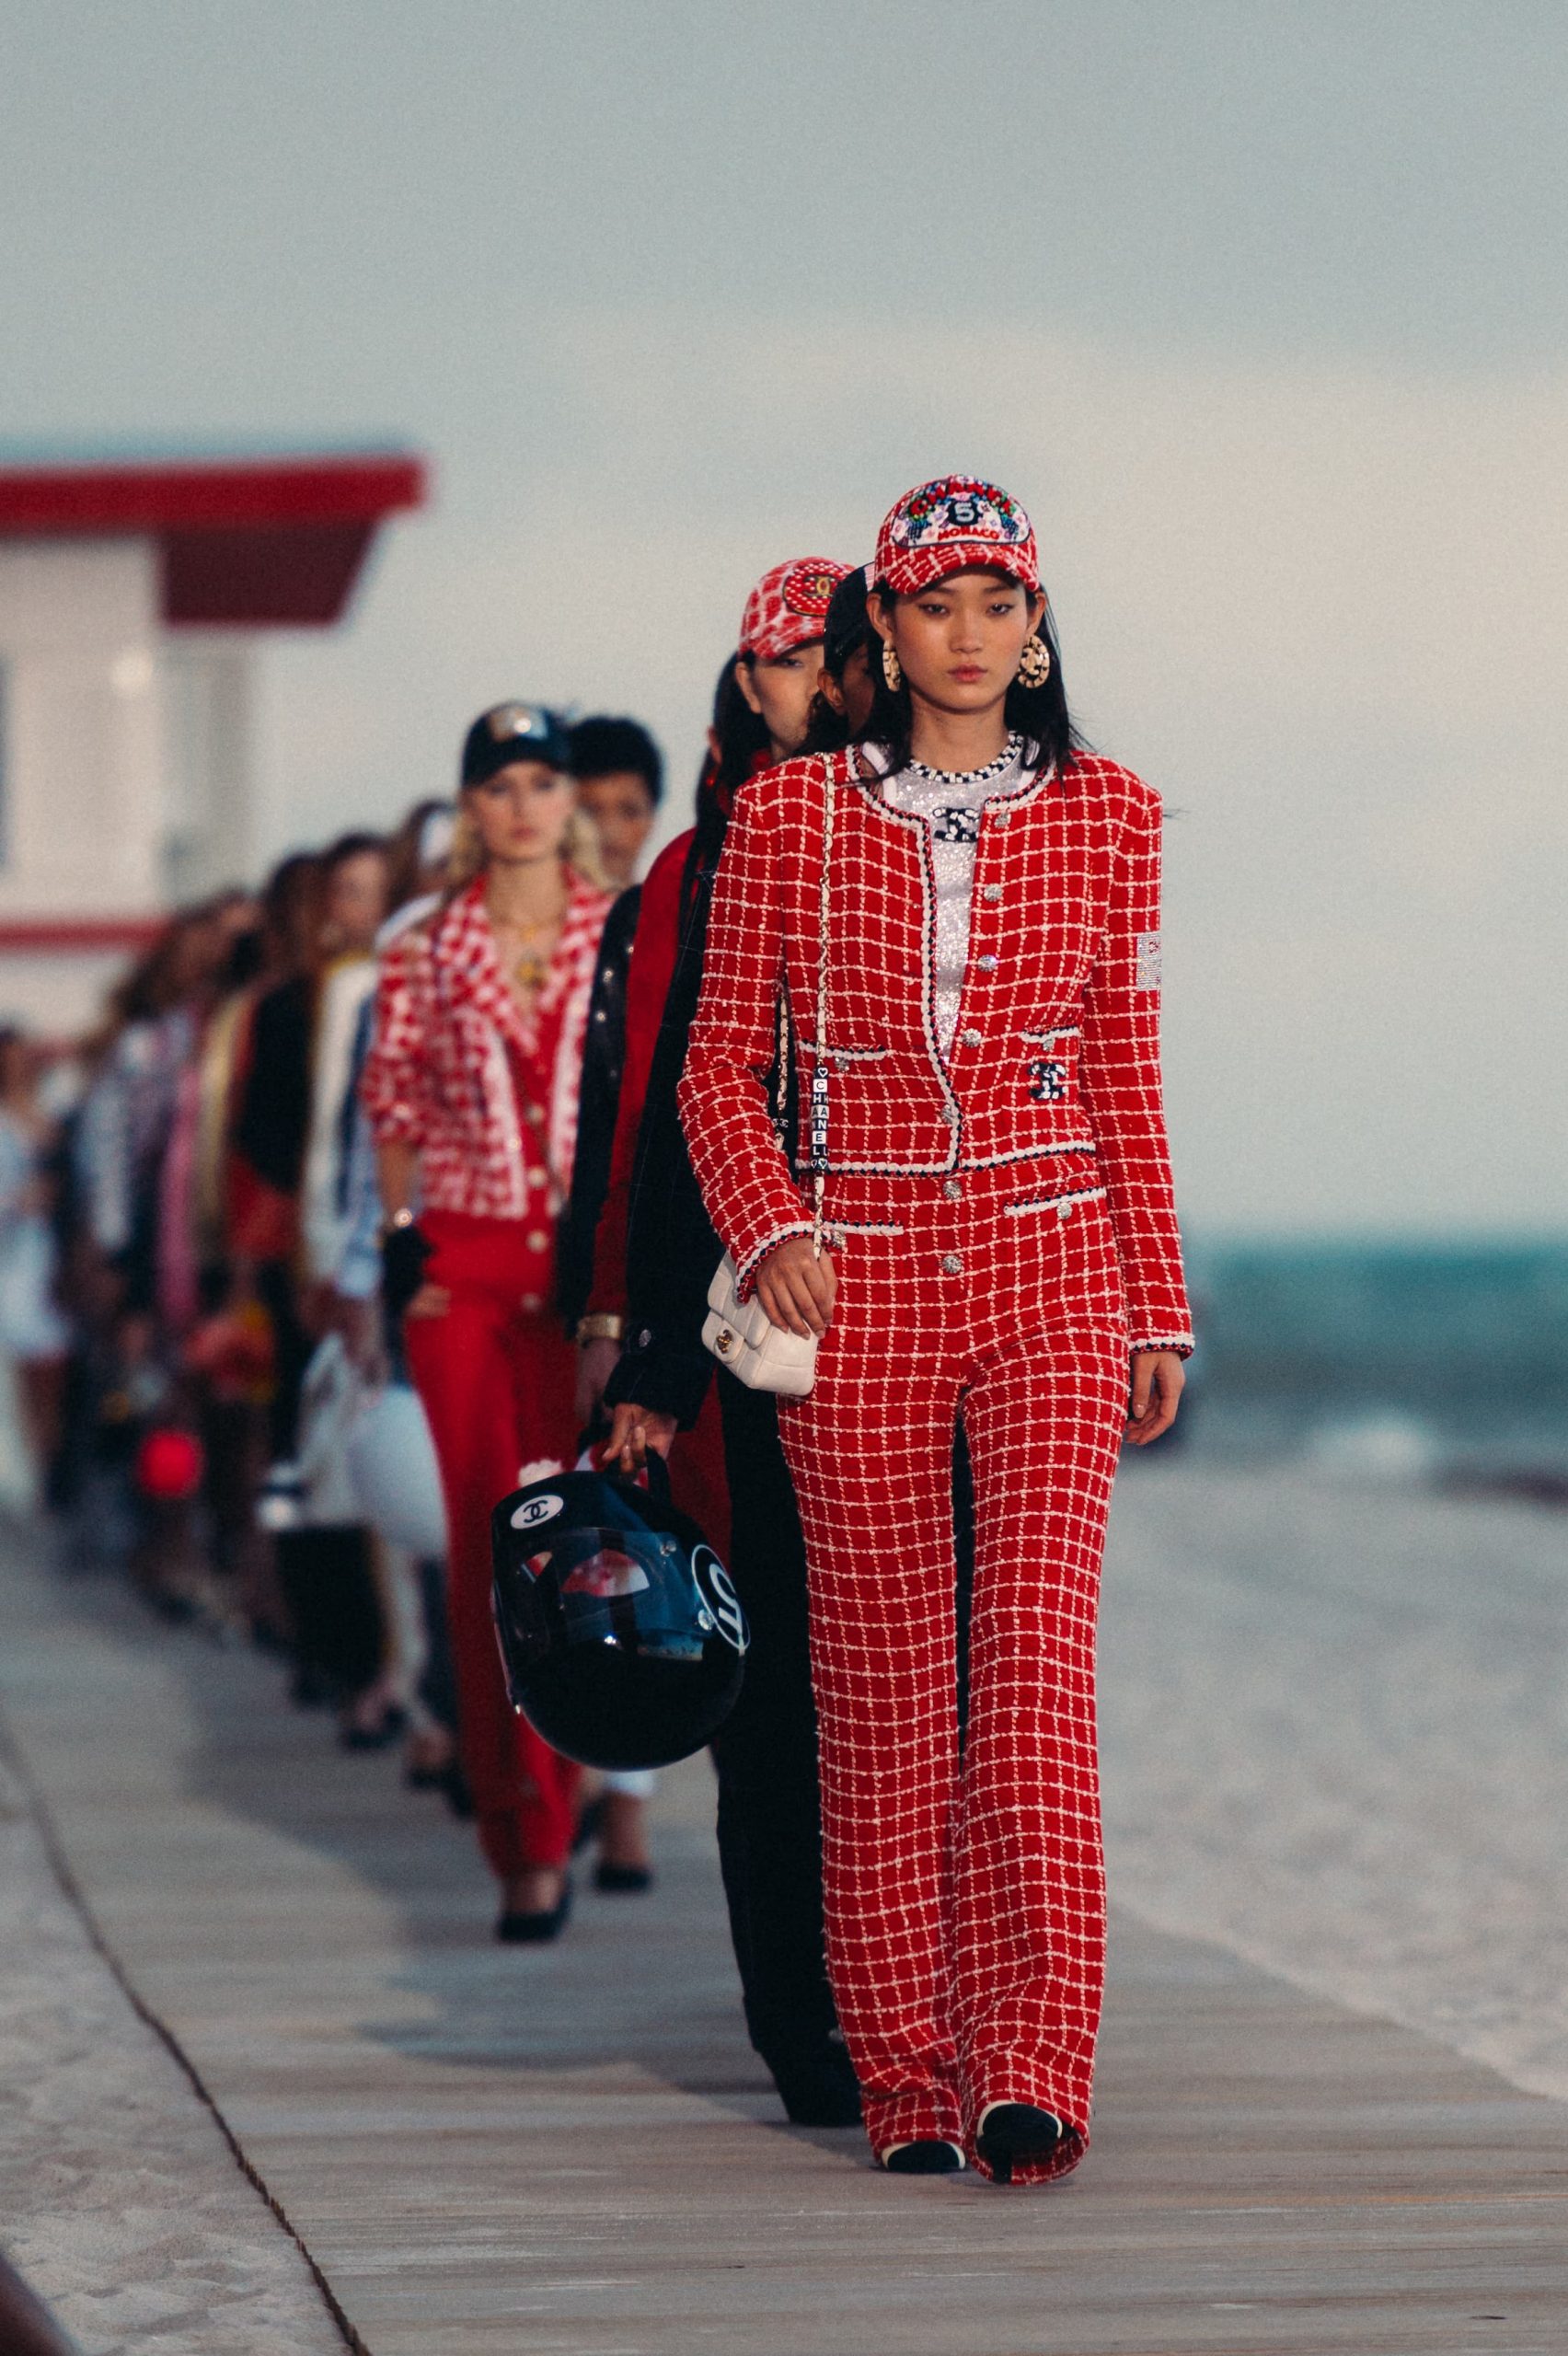 The Best Behind-the-Scenes Photos From Chanel's Resort 2023 Show